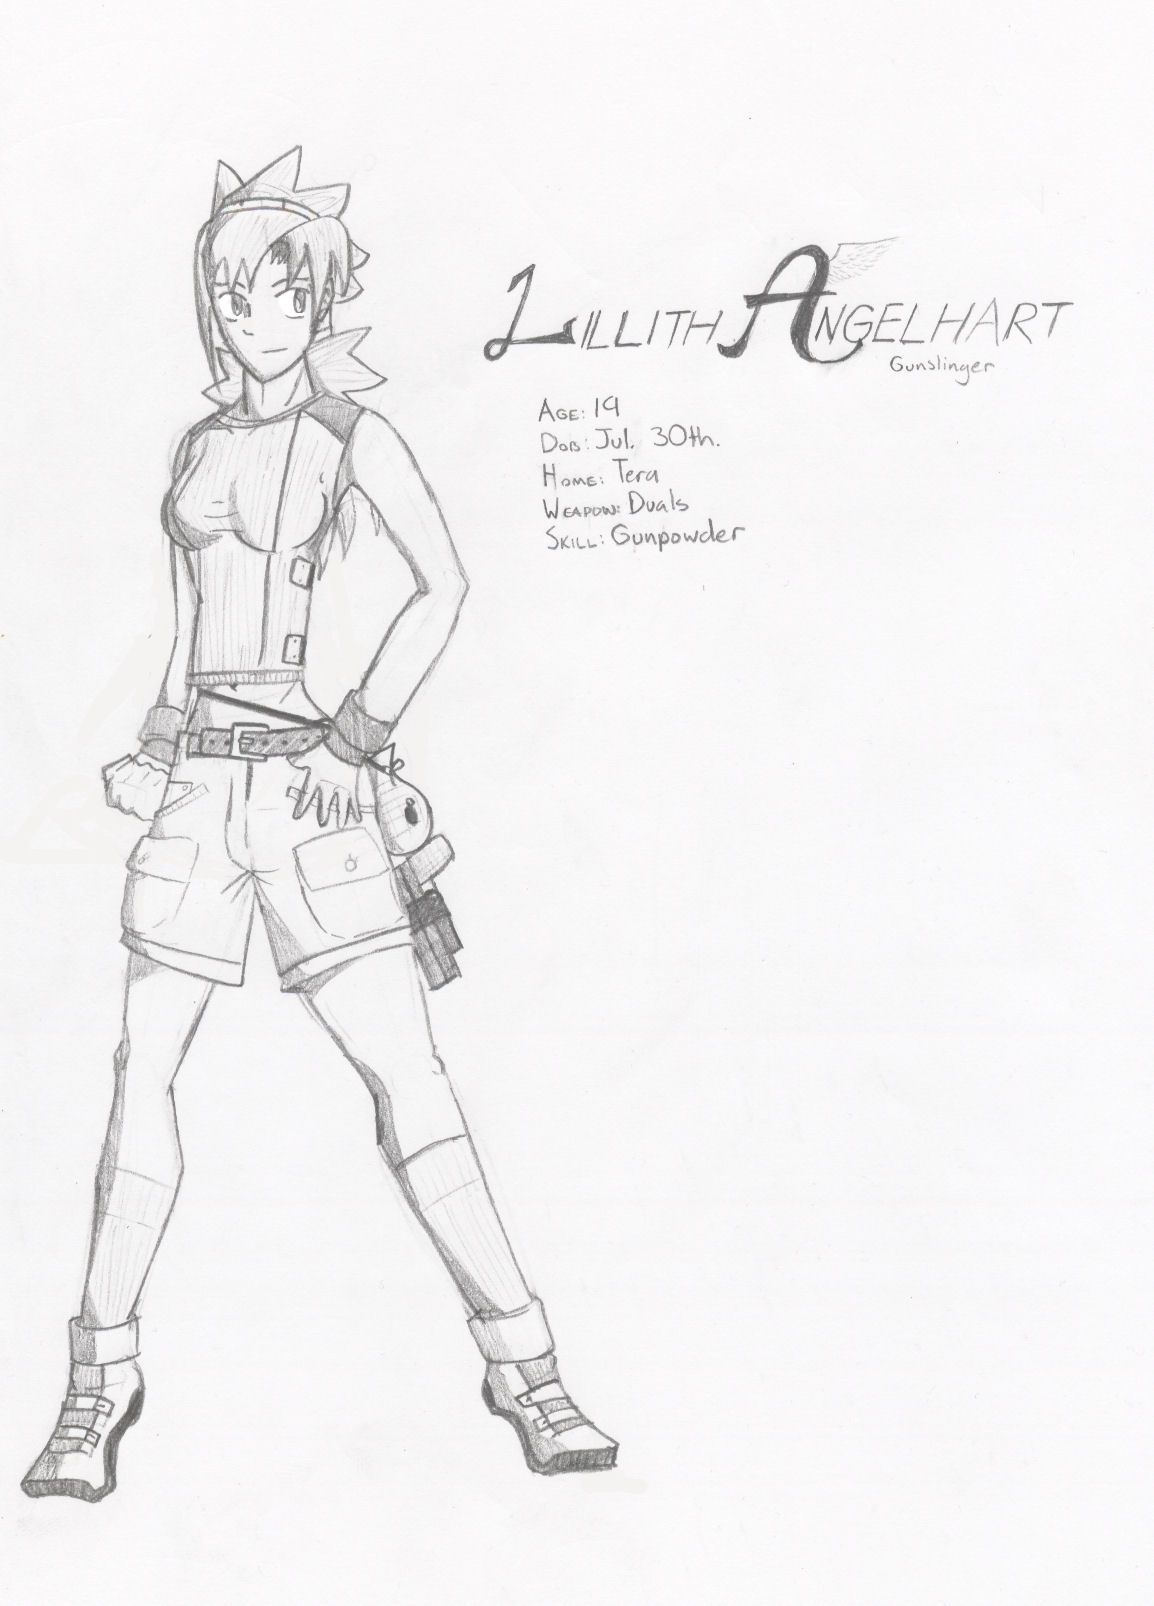 Lillith Angelhart-Final Sketch by Cloud36